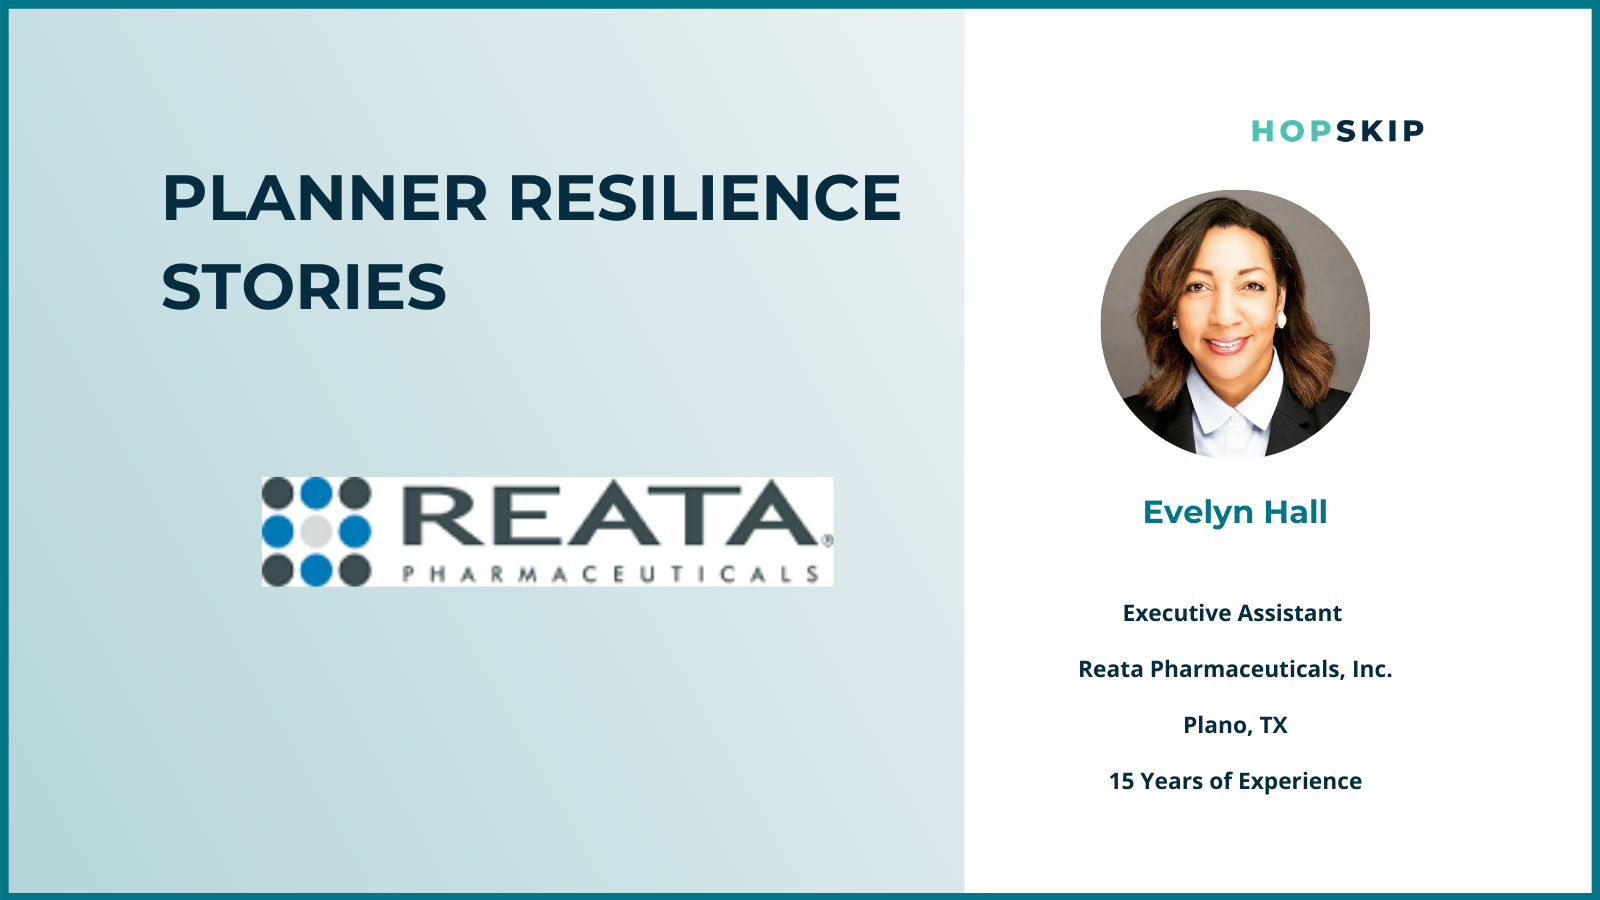 Evelyn Hall of Reata Pharmaceuticals, meeting/event planner and executive assistant